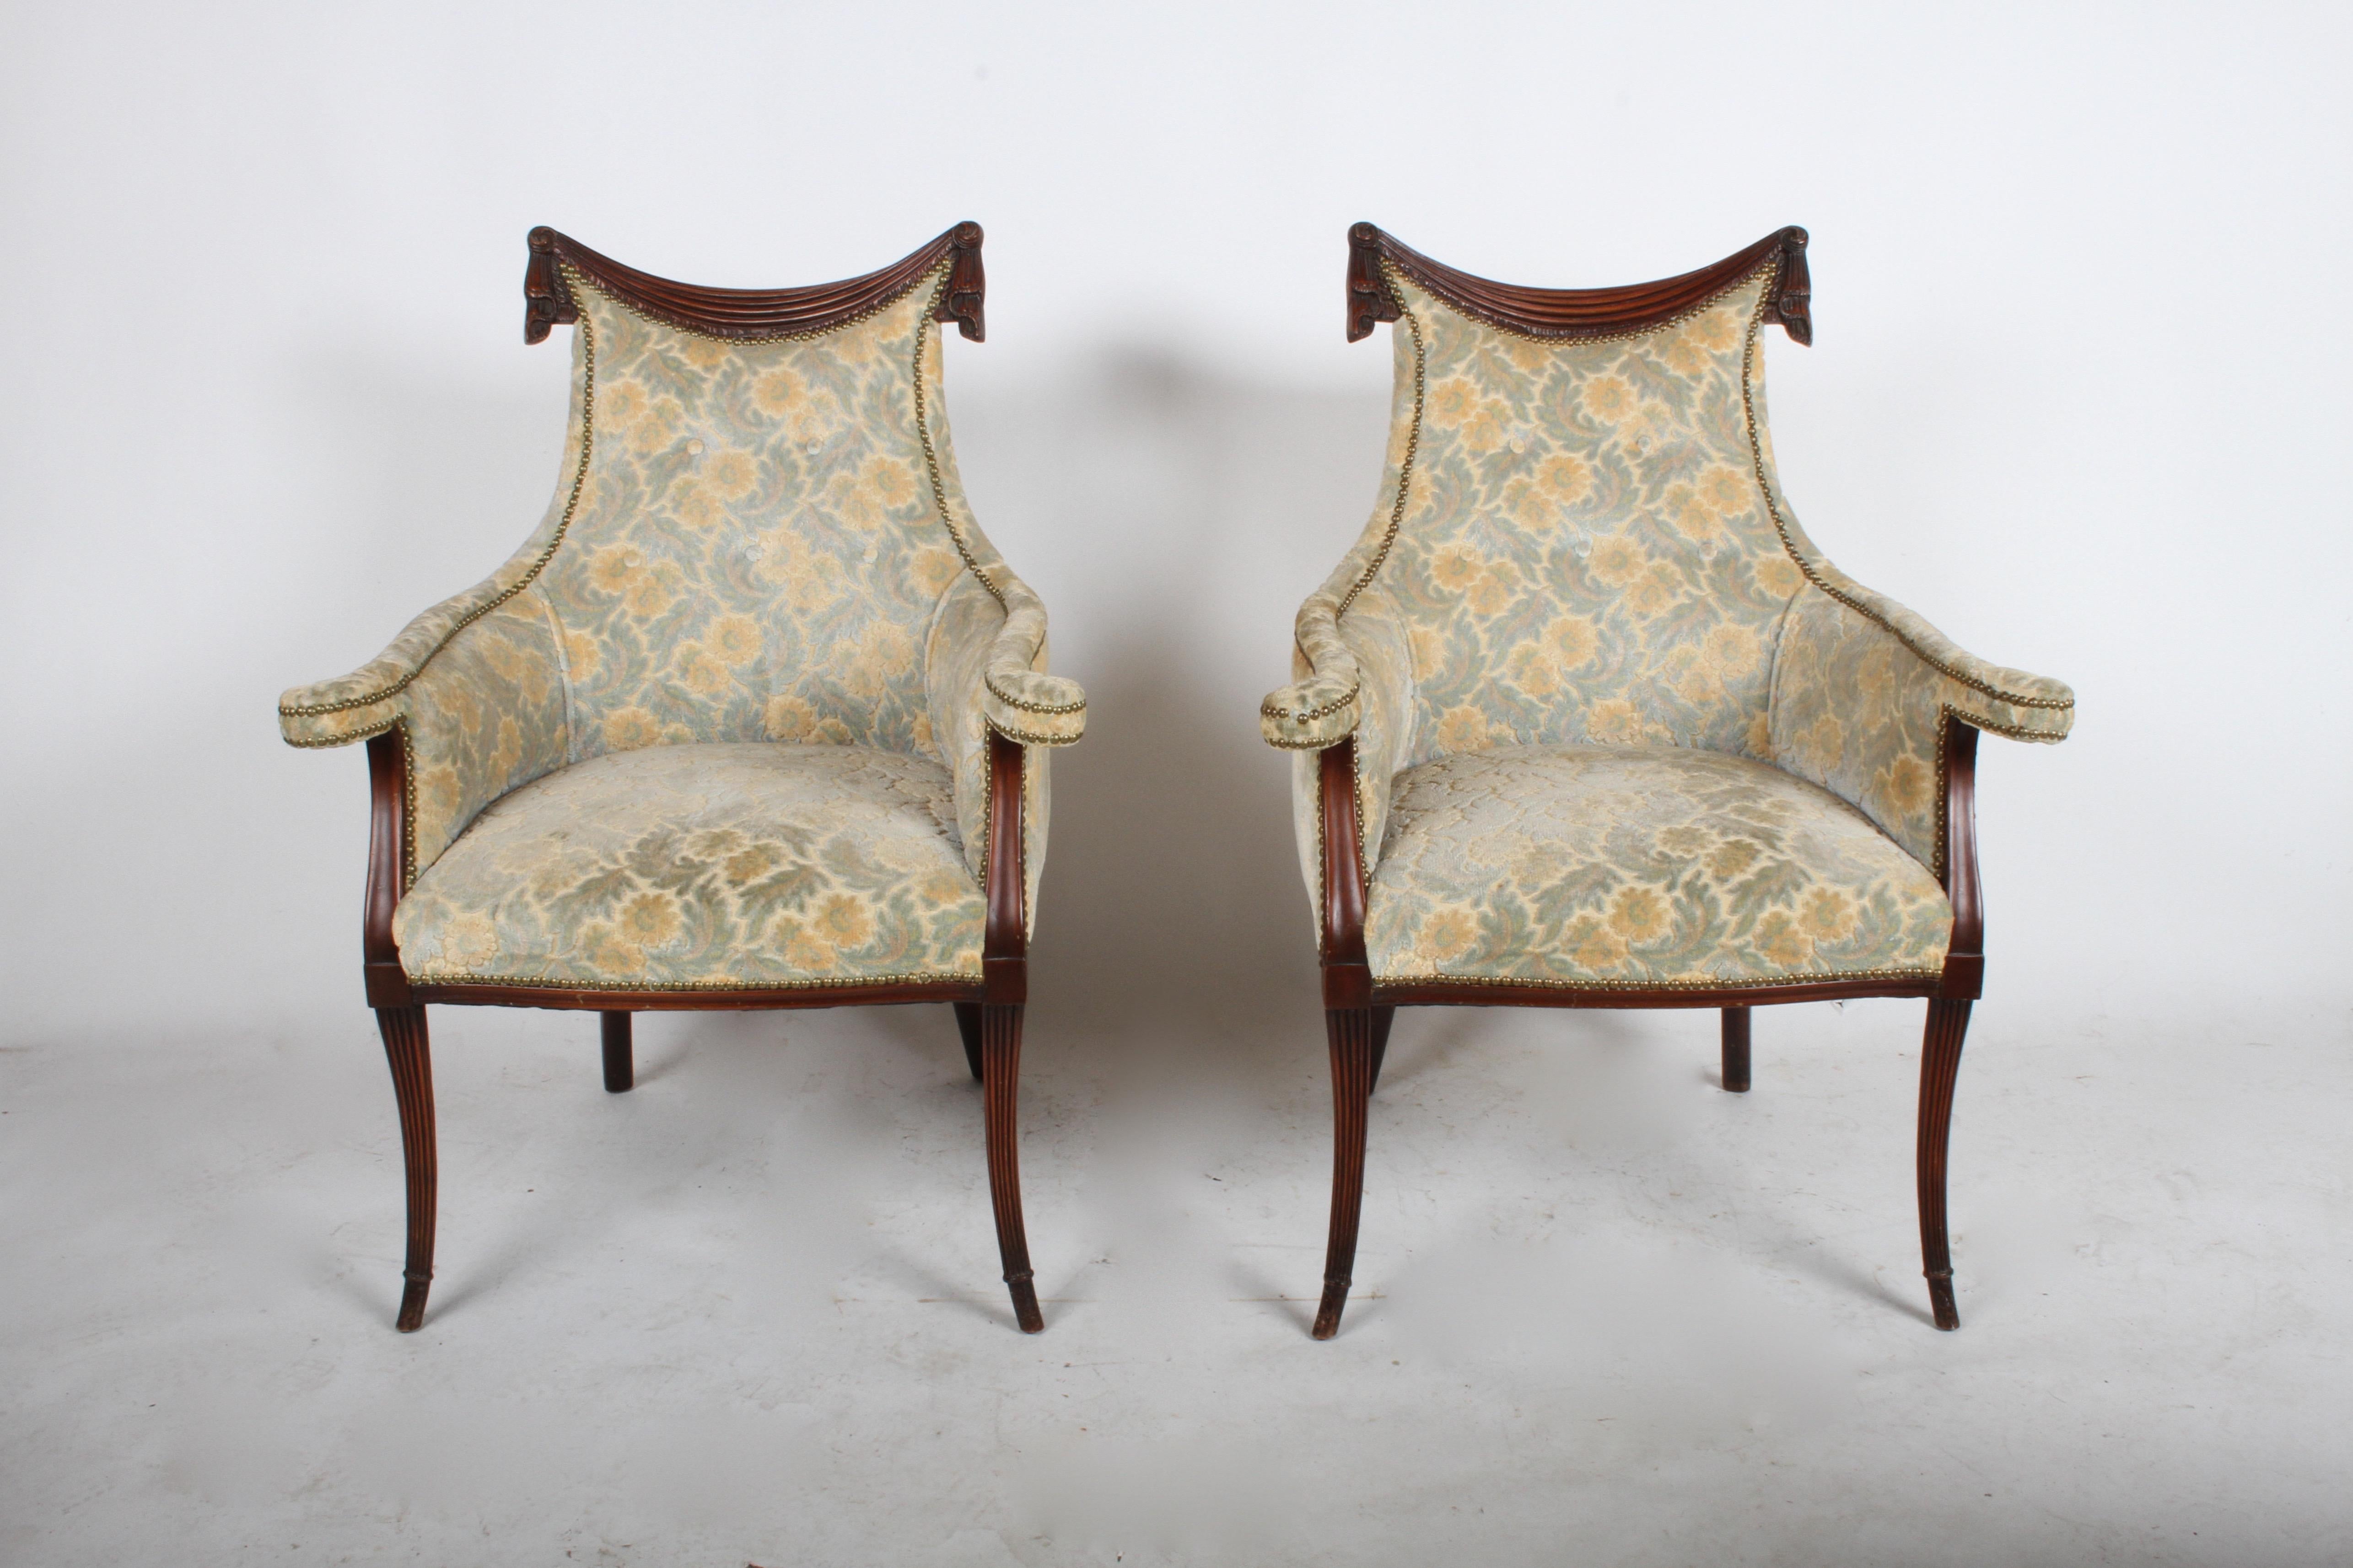 Pair of glamorous Grosfeld House swag and drape motif club chairs, circa 1940s. Shown in original condition, with older re-upholstery with brass tacks. Mahogany frame in nice condition, showing some marks on legs. Seat depth is 20